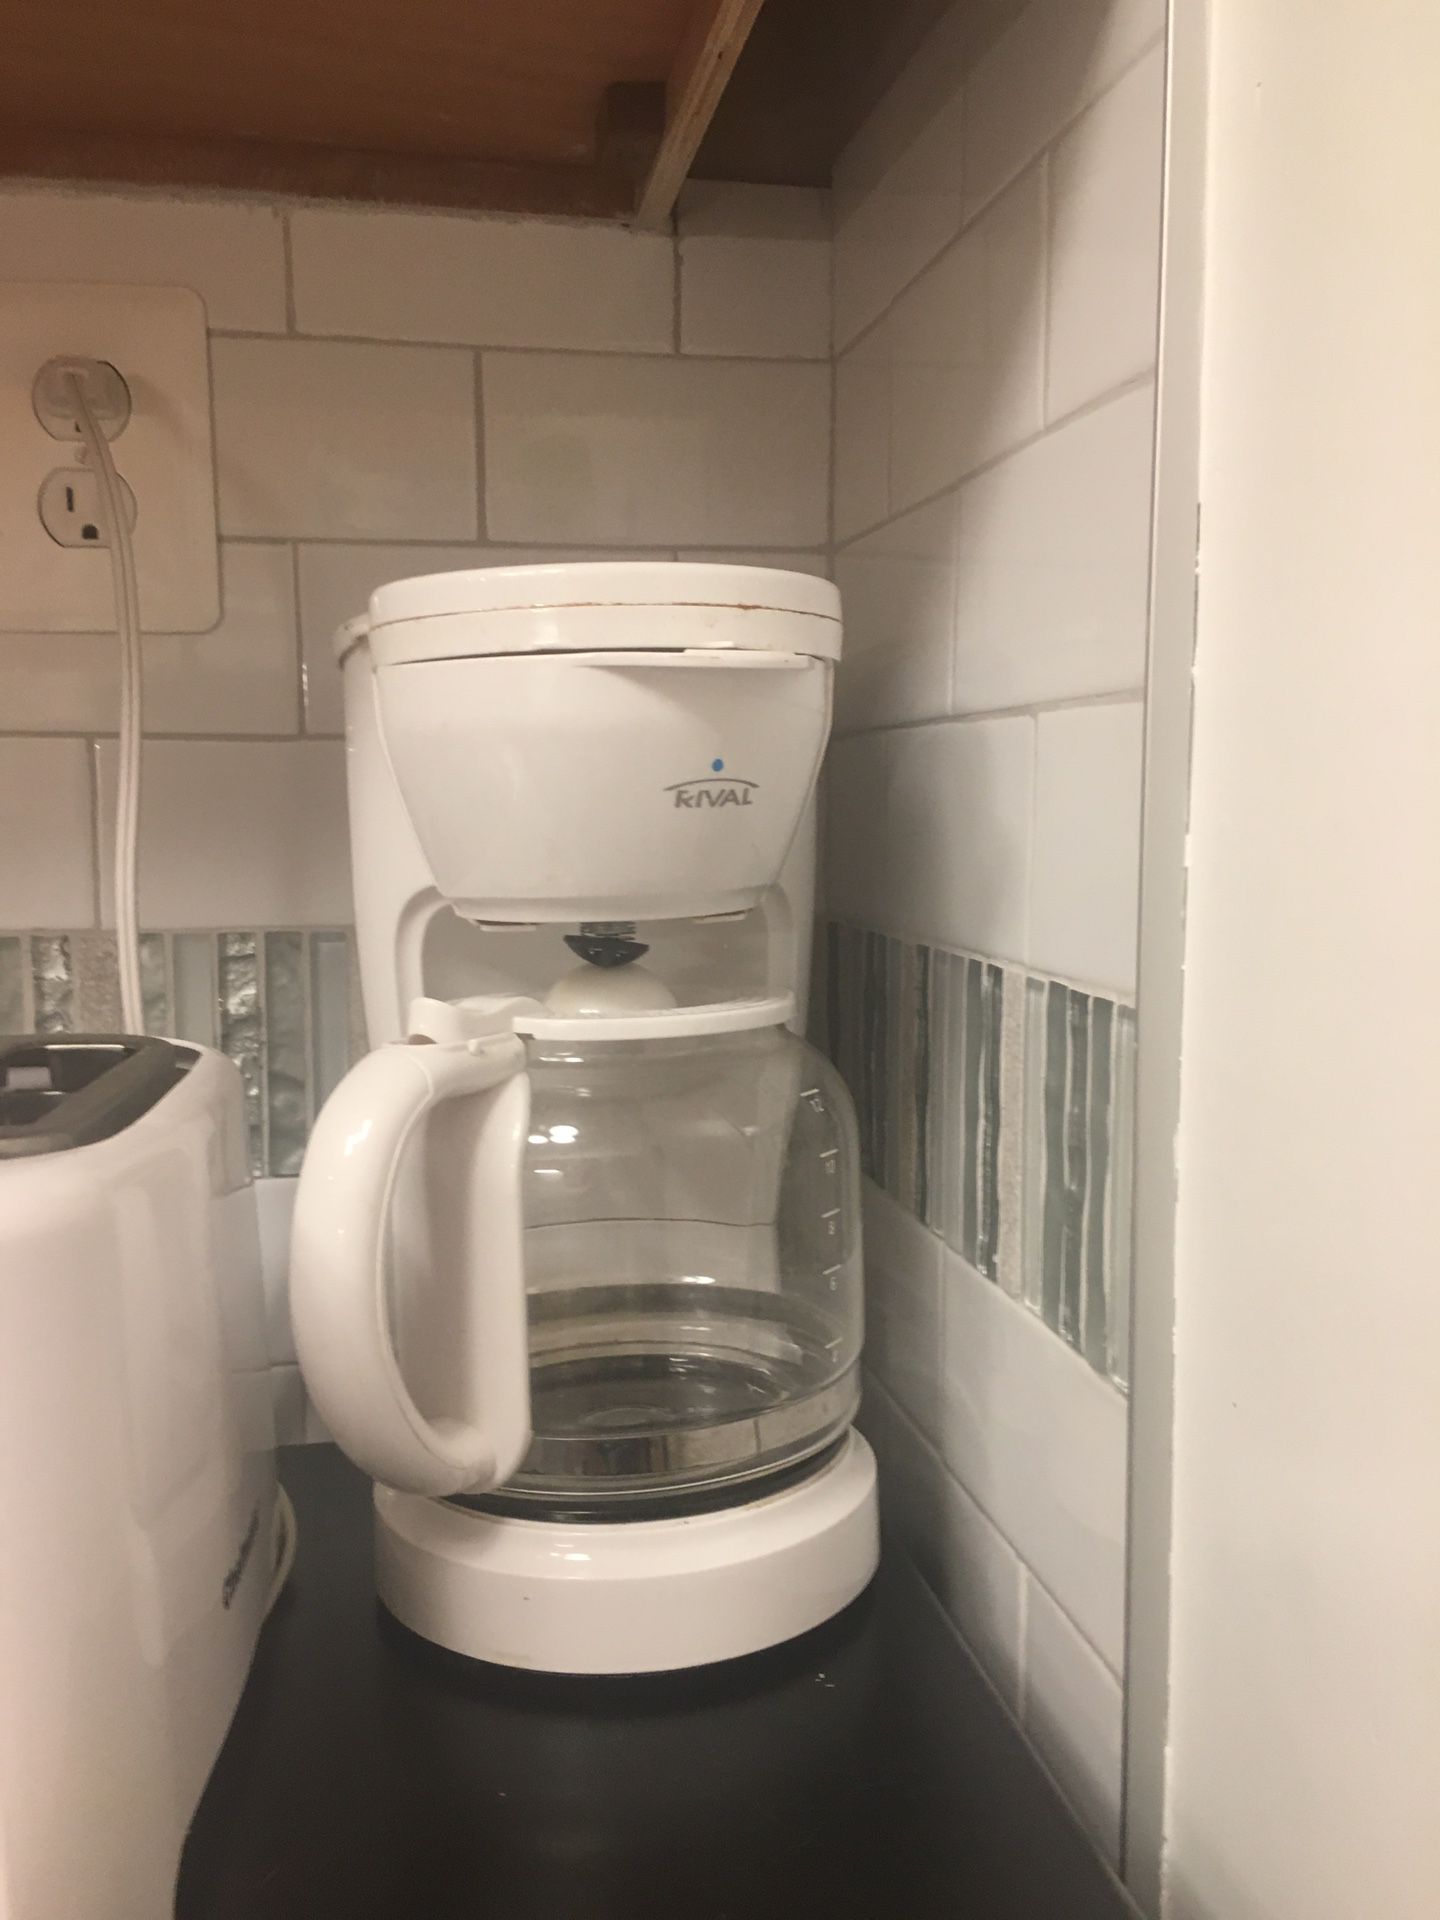 Blender, toaster, and 10 cup coffee pot